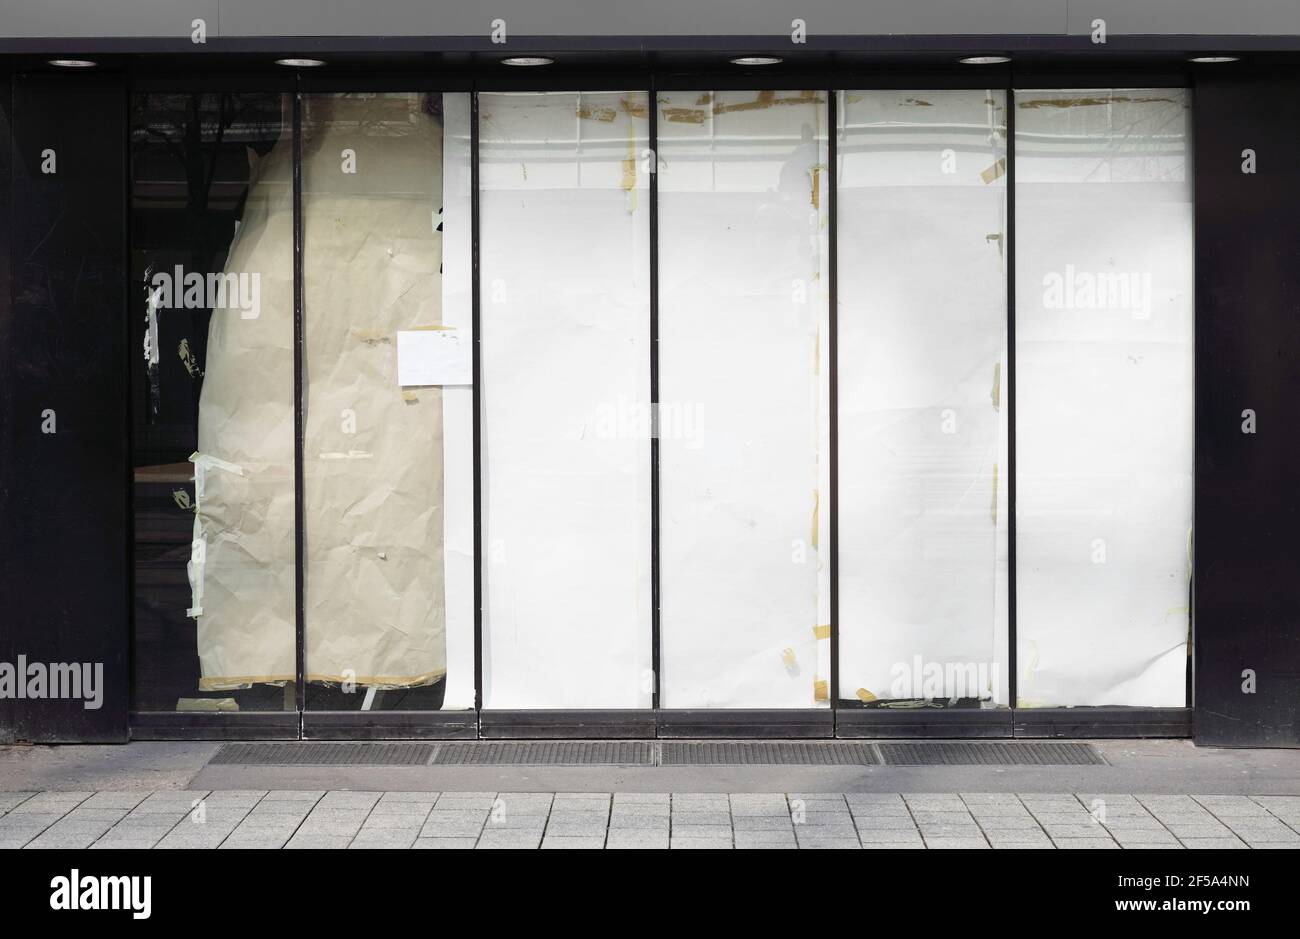 closed or empty shop or store storefront with blocked windows Stock Photo